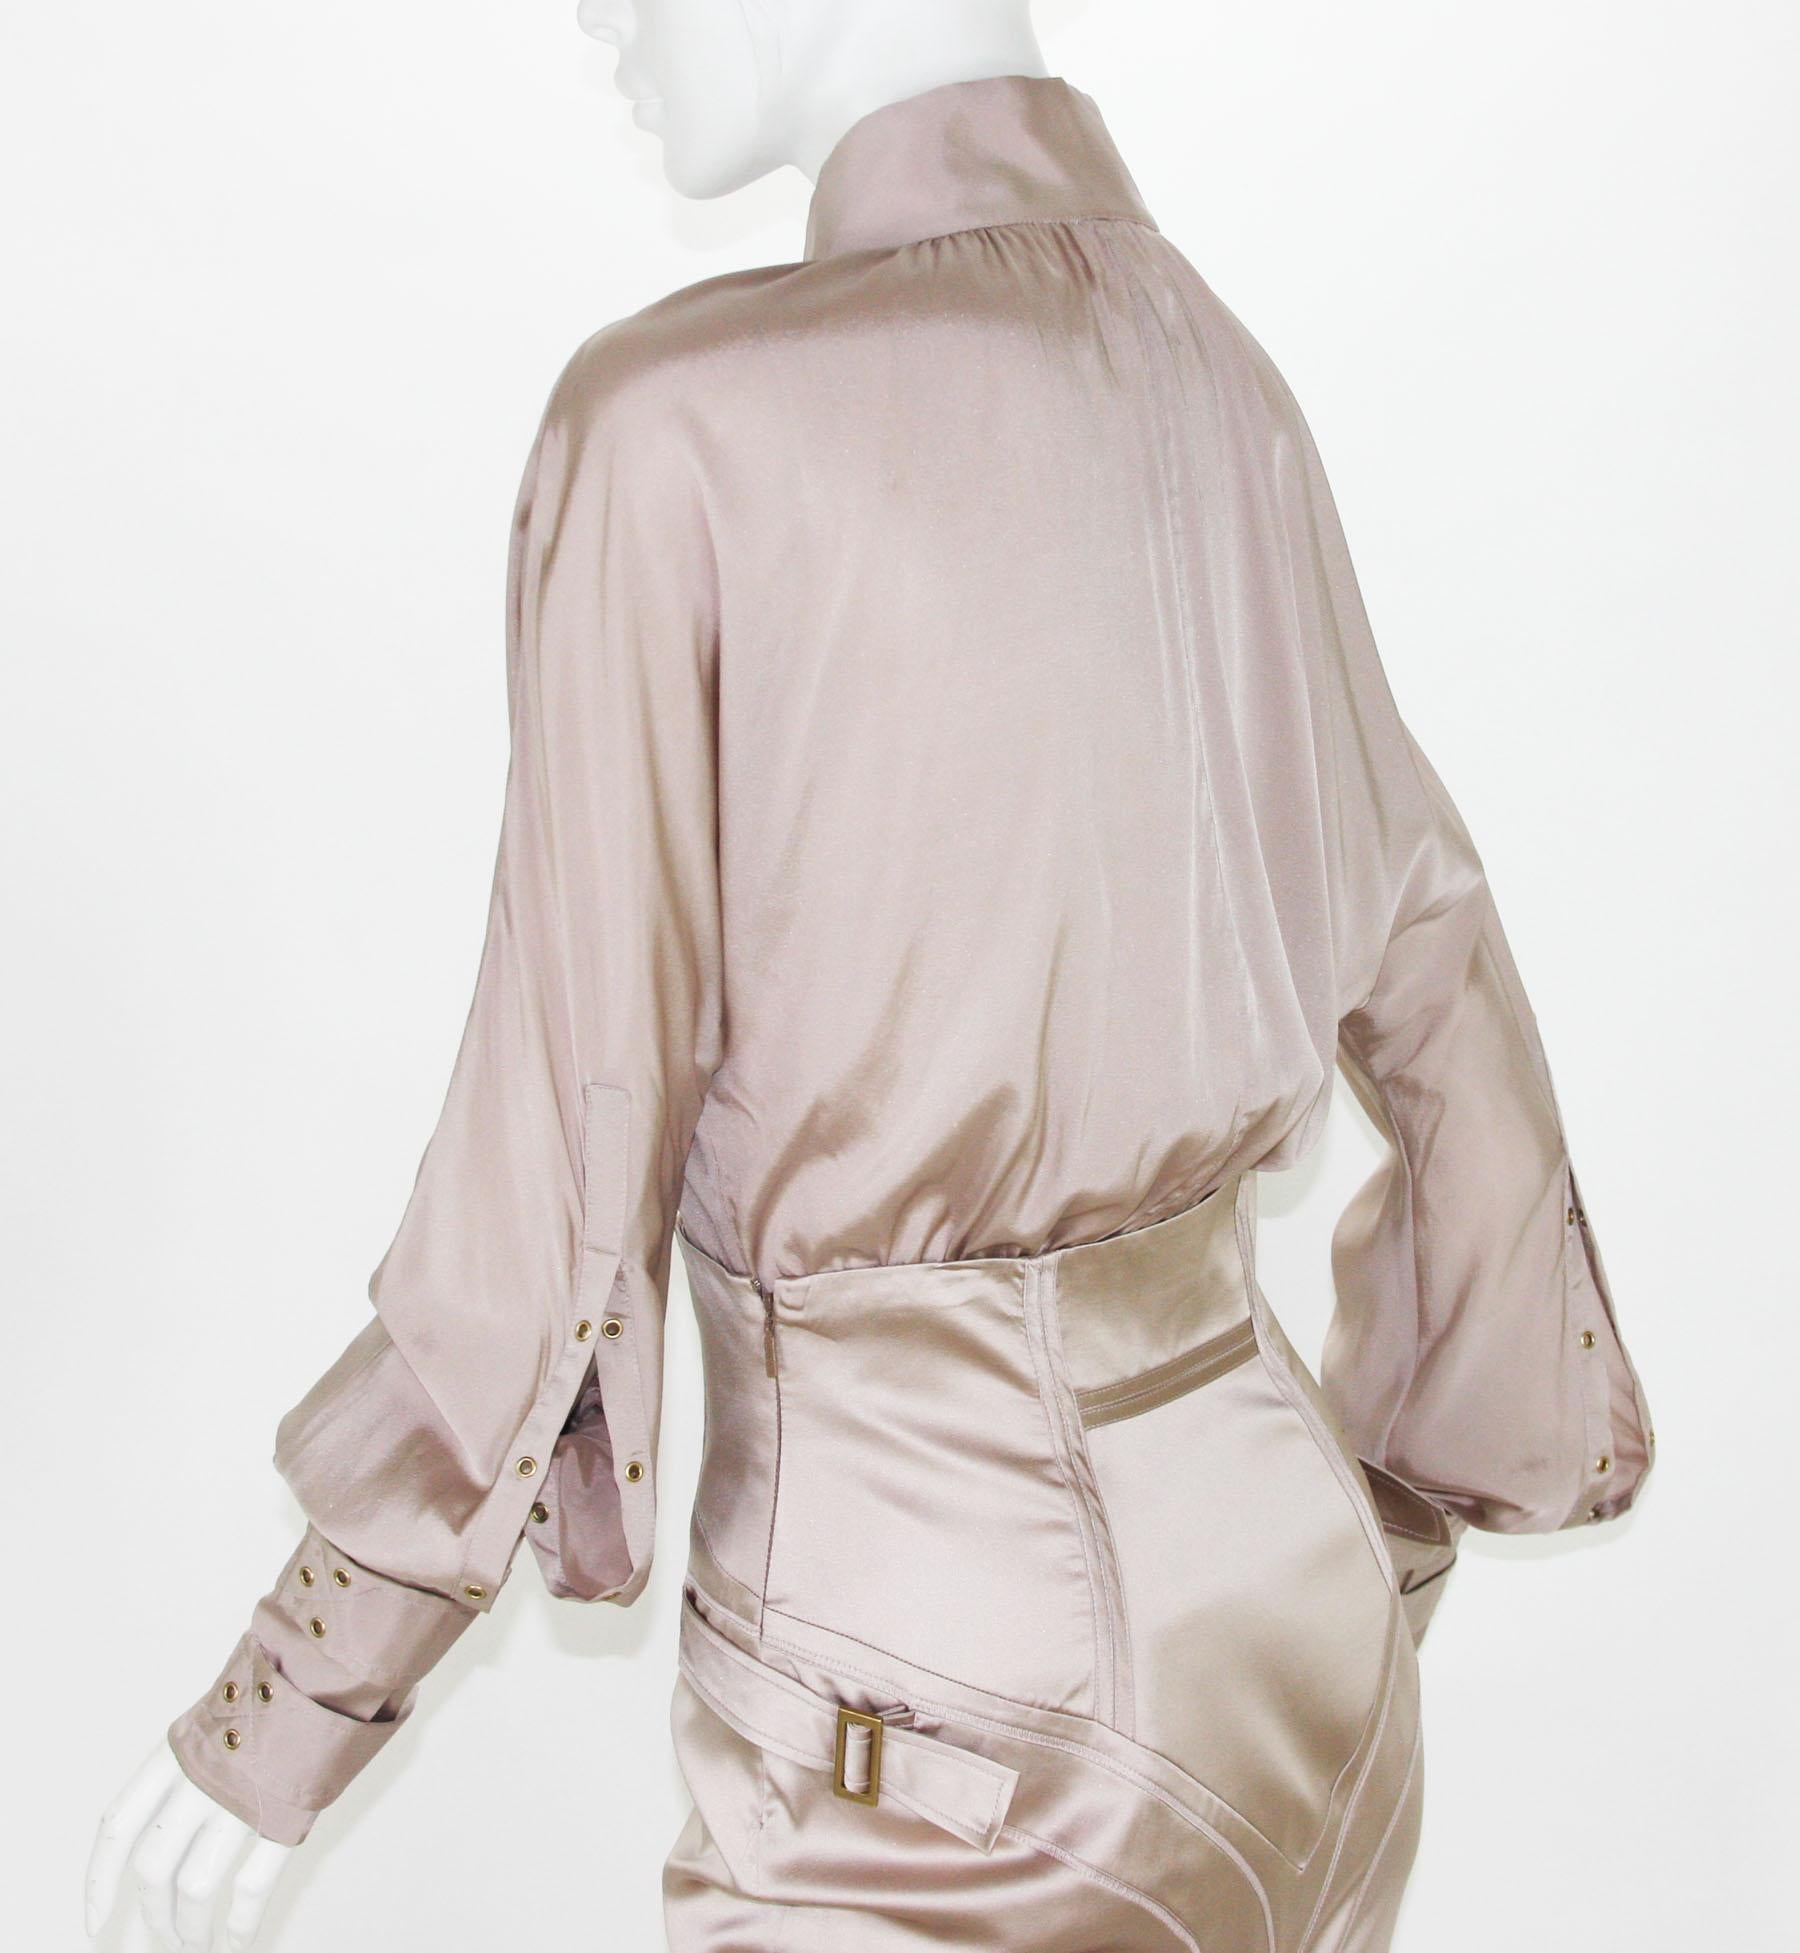 Tom Ford for Gucci F/W 2003 Collection Nude Silk Grommet Skirt Suit 40/42  In Excellent Condition For Sale In Montgomery, TX